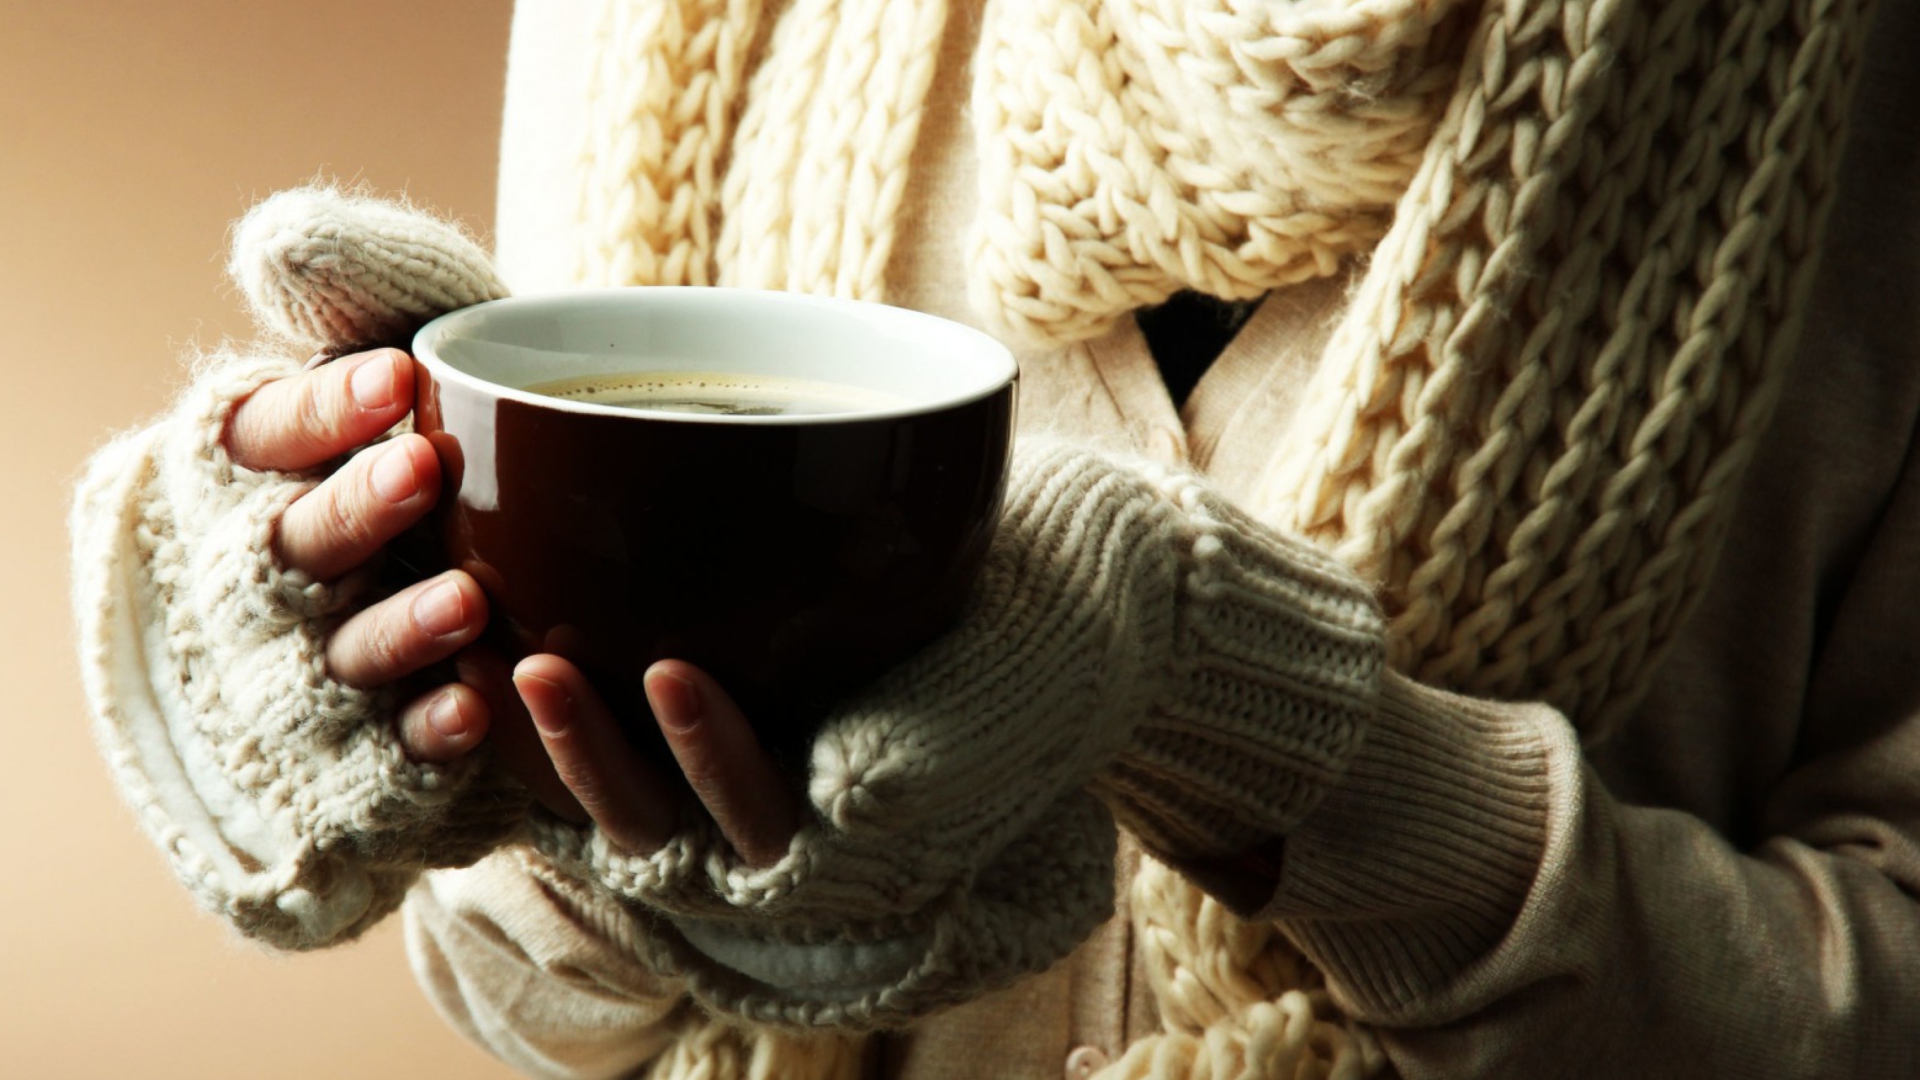 Hot Cup Of Coffee In Cold Winter Day screenshot #1 1920x1080